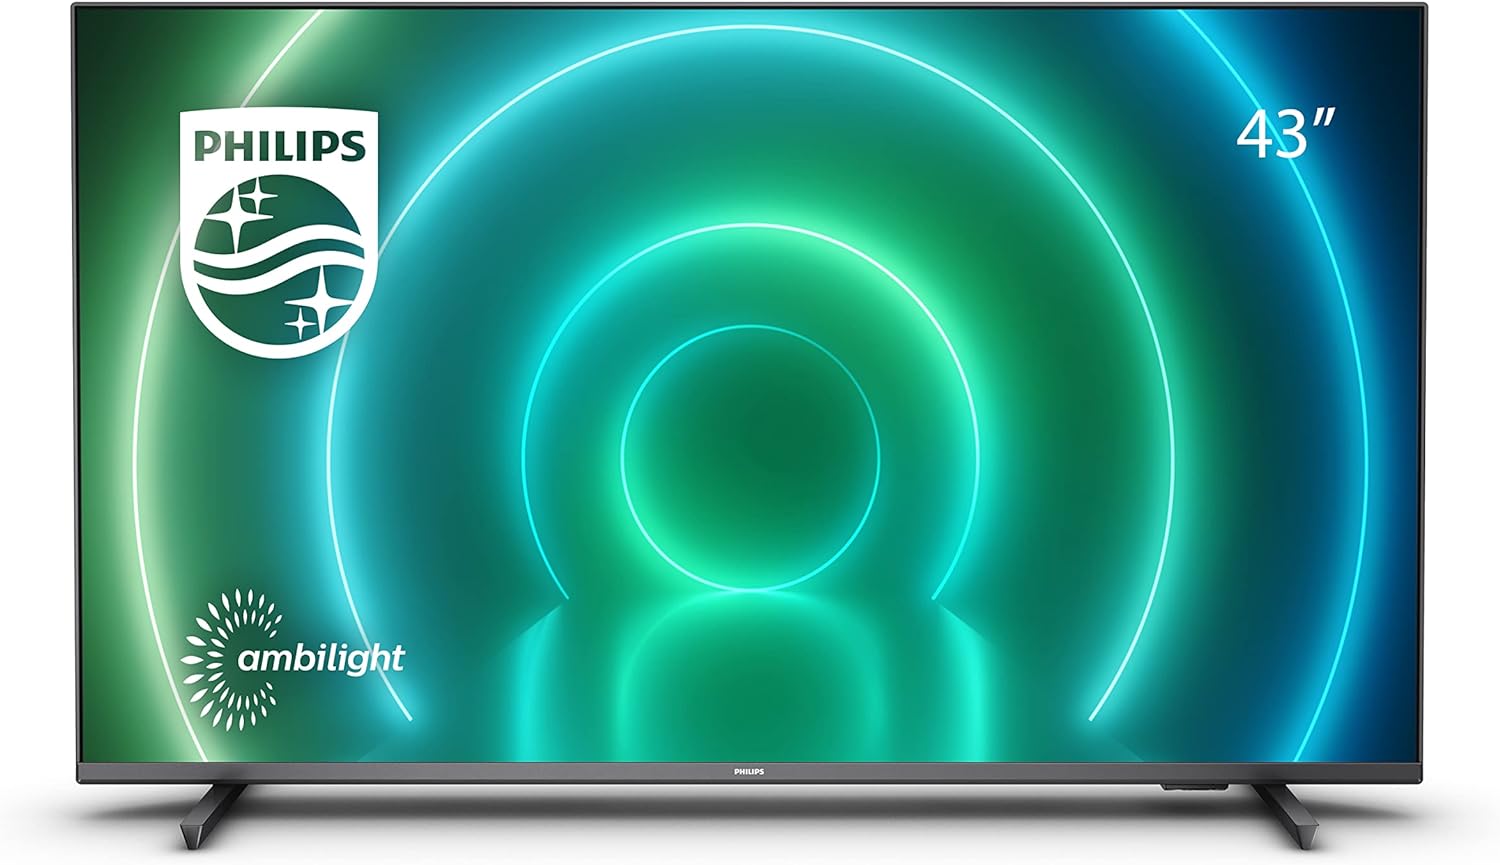 PHILIPS Ambilight PUS8108 55 inch Smart 4K LED TV | UHD & HDR10+ | 60Hz | P5 Perfect Picture Engine | SAPHI | Dolby Atmos | 20W Speakers | Google Assistant & Alexa Compatible - Amazing Gadgets Outlet